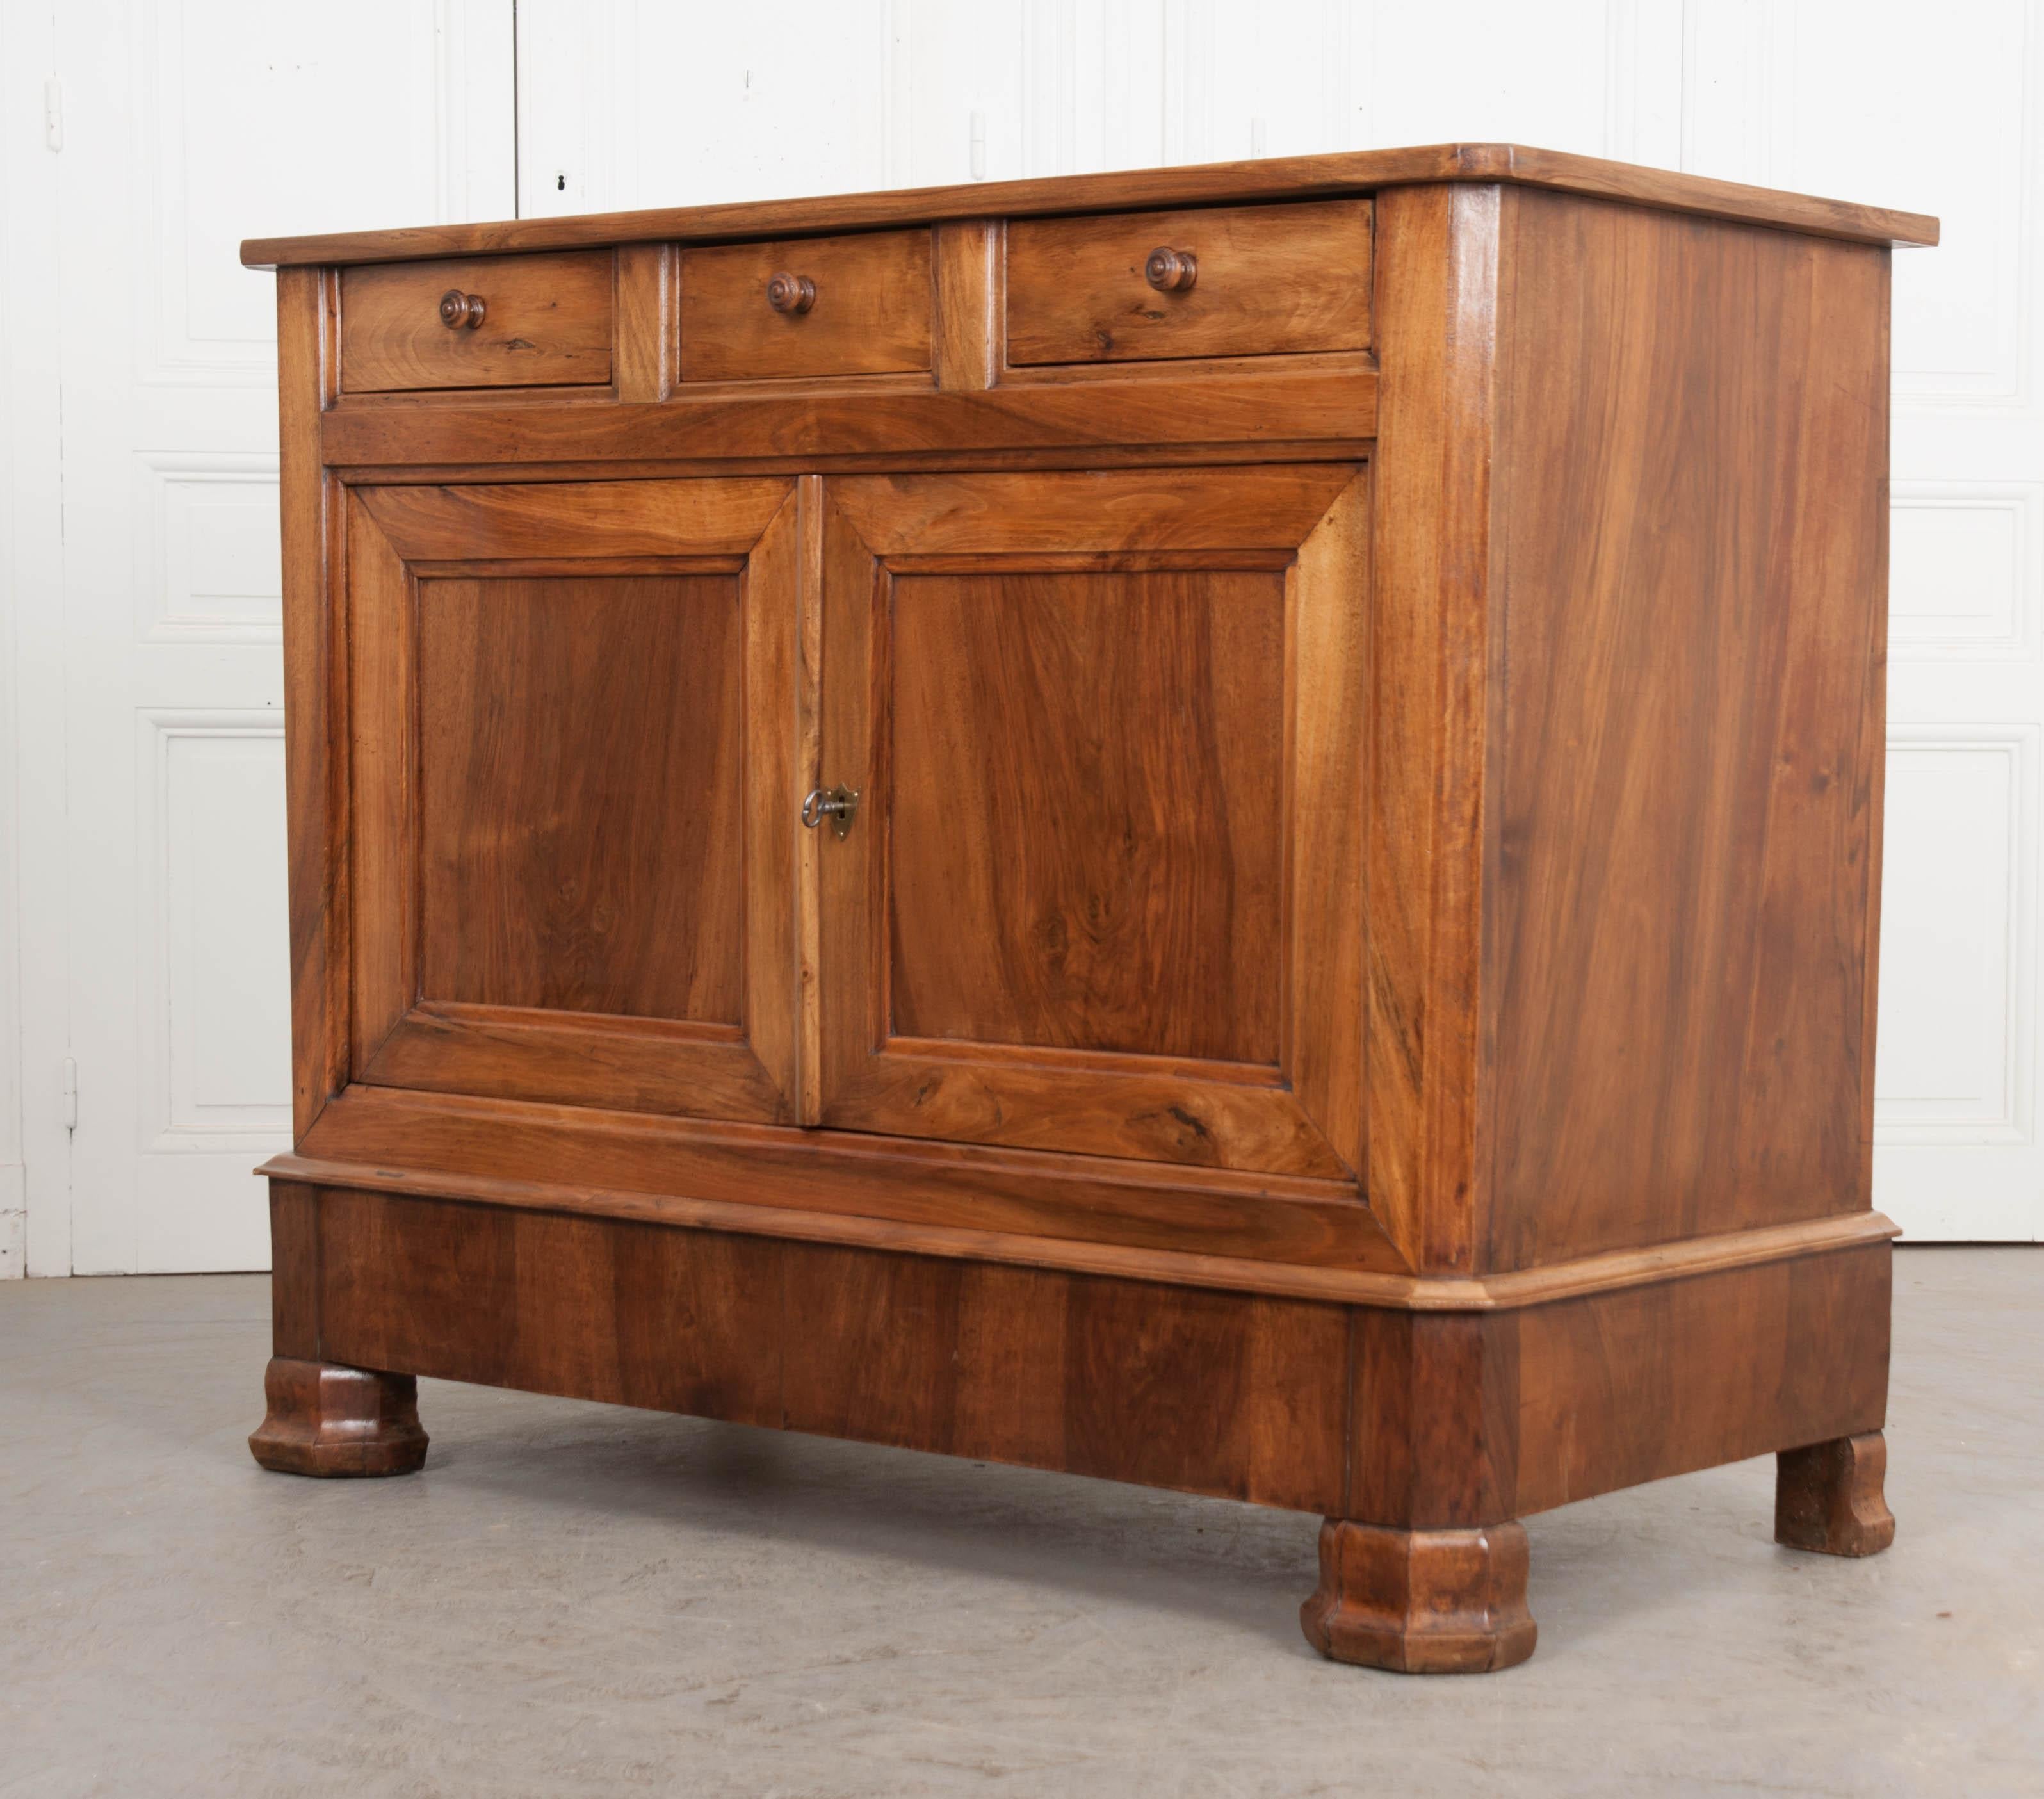 Beautifully-grained walnut was selected when creating this emblematic Louis Philippe buffet in France, circa 1880. The top has canted corners that correspond to those found on the base. Three drawers are located above the buffet’s cavity, all